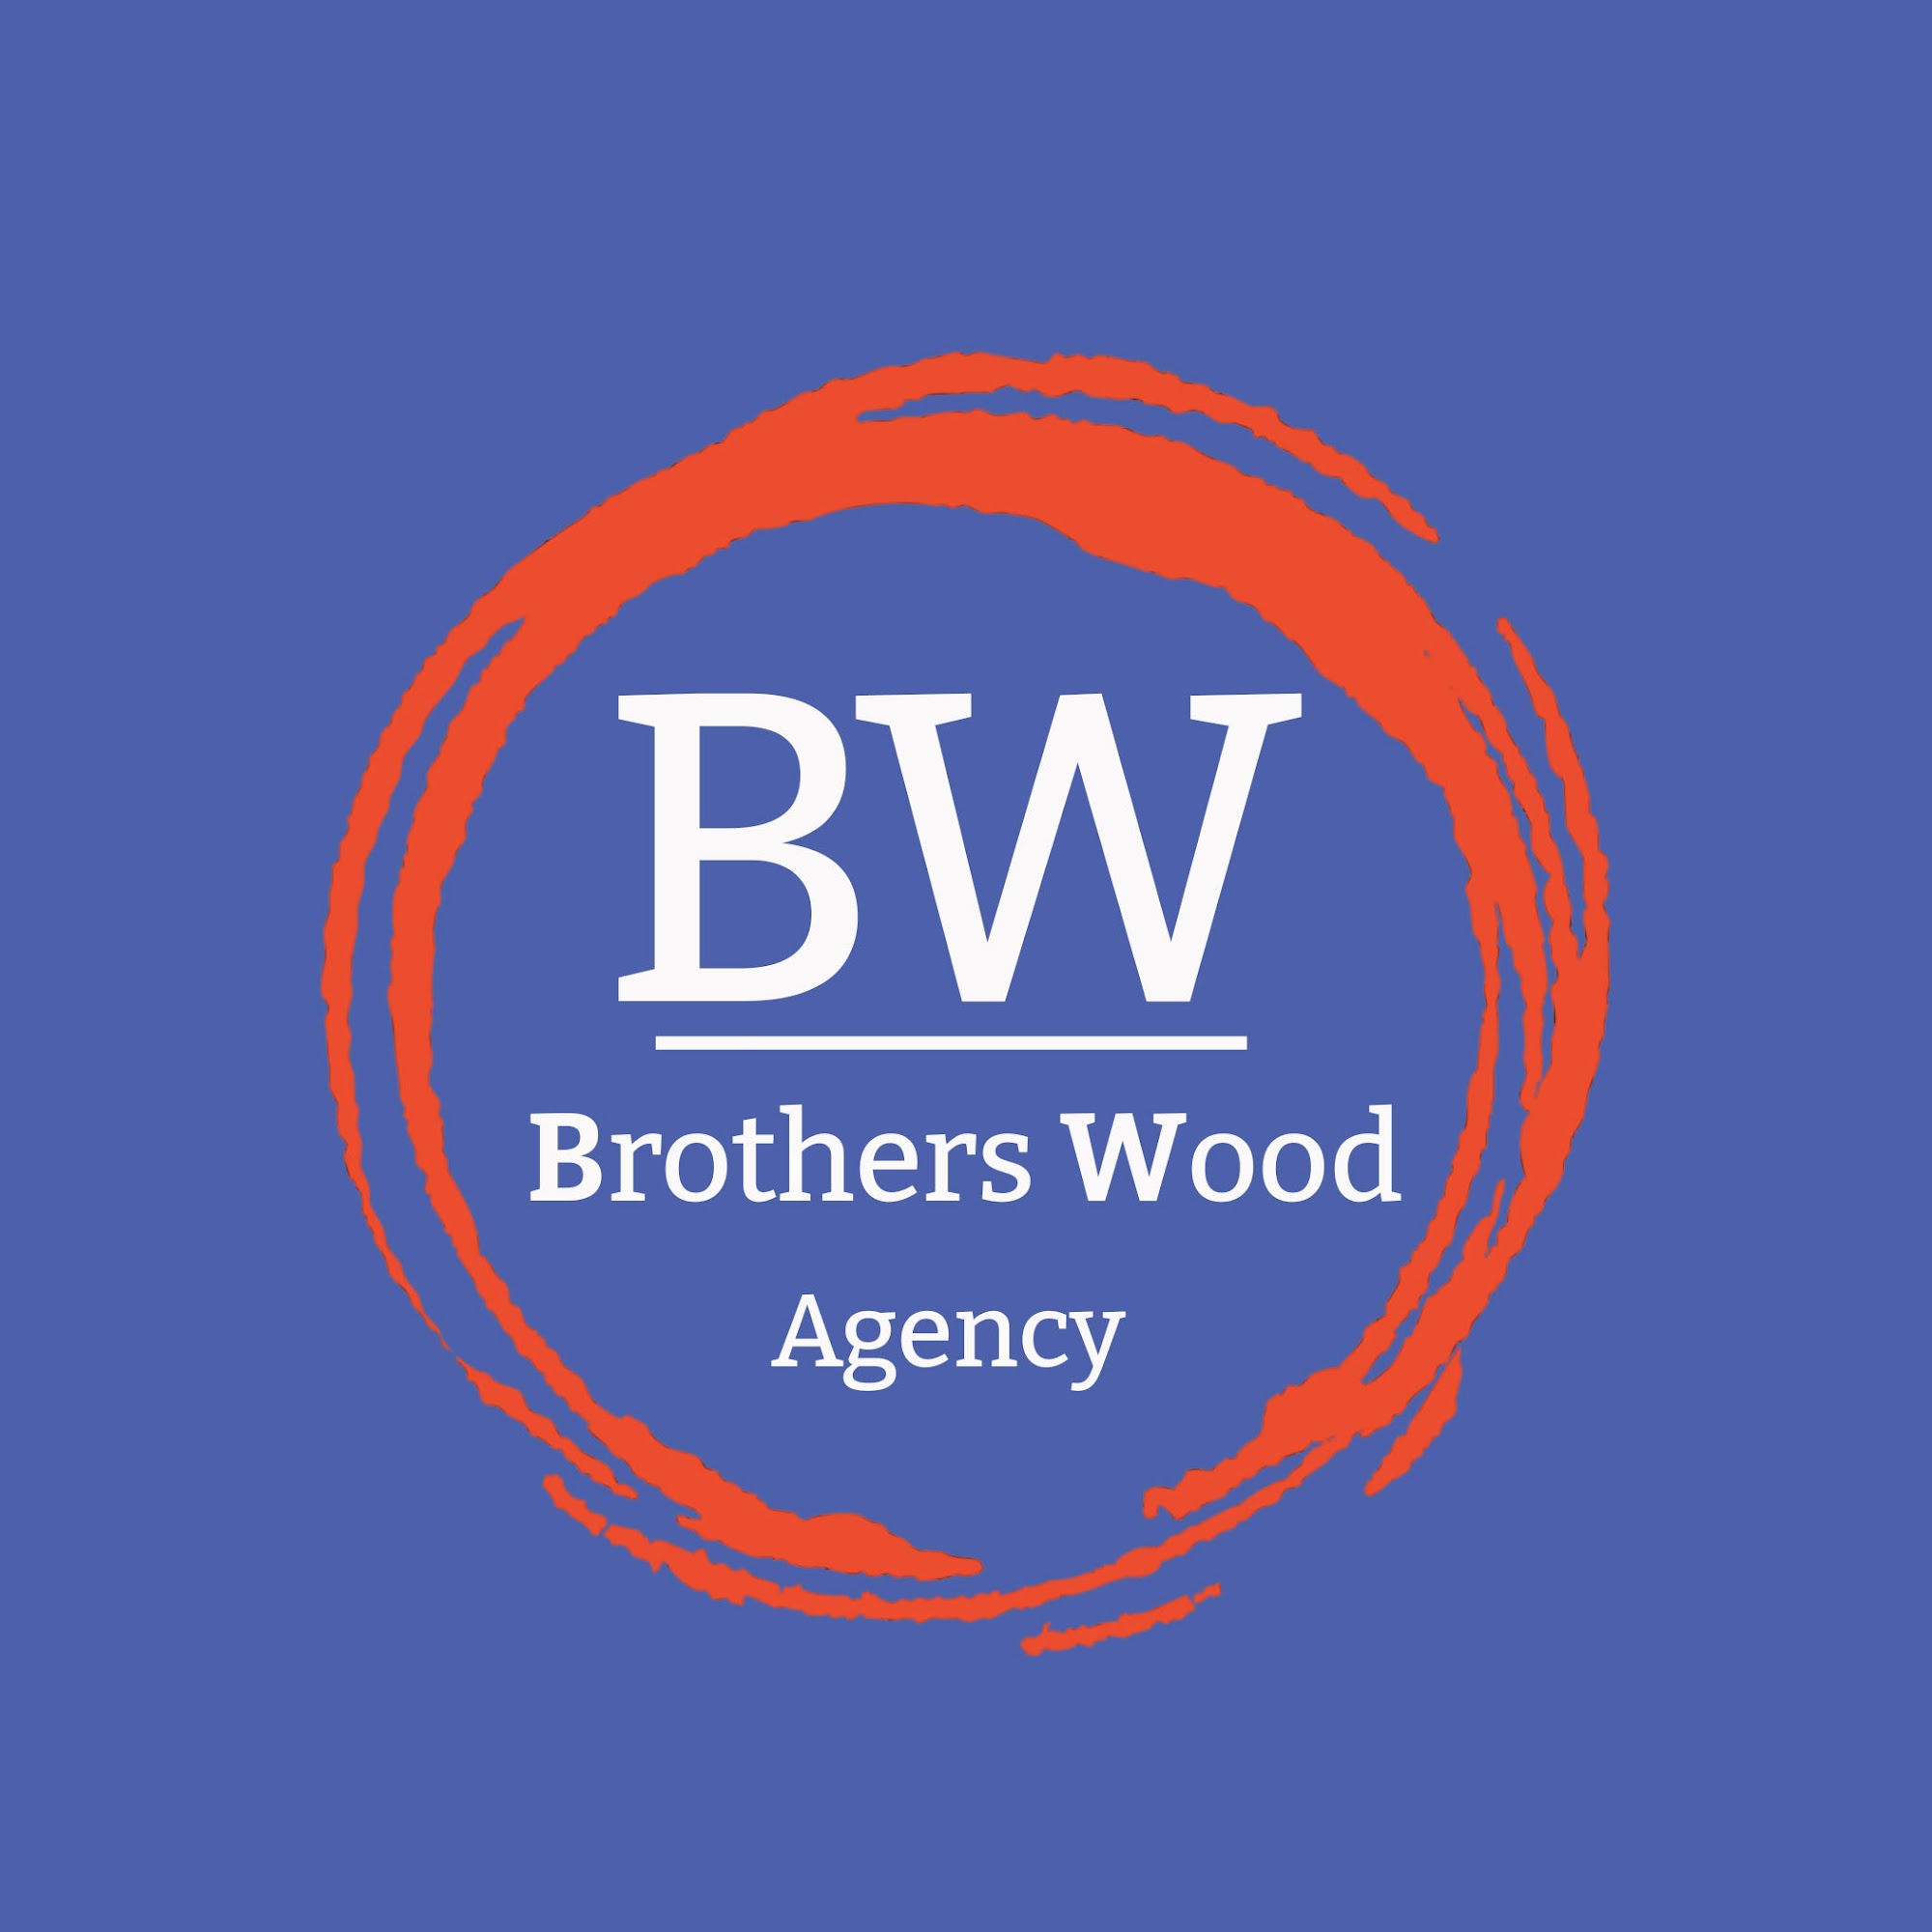 Brothers Wood Agency